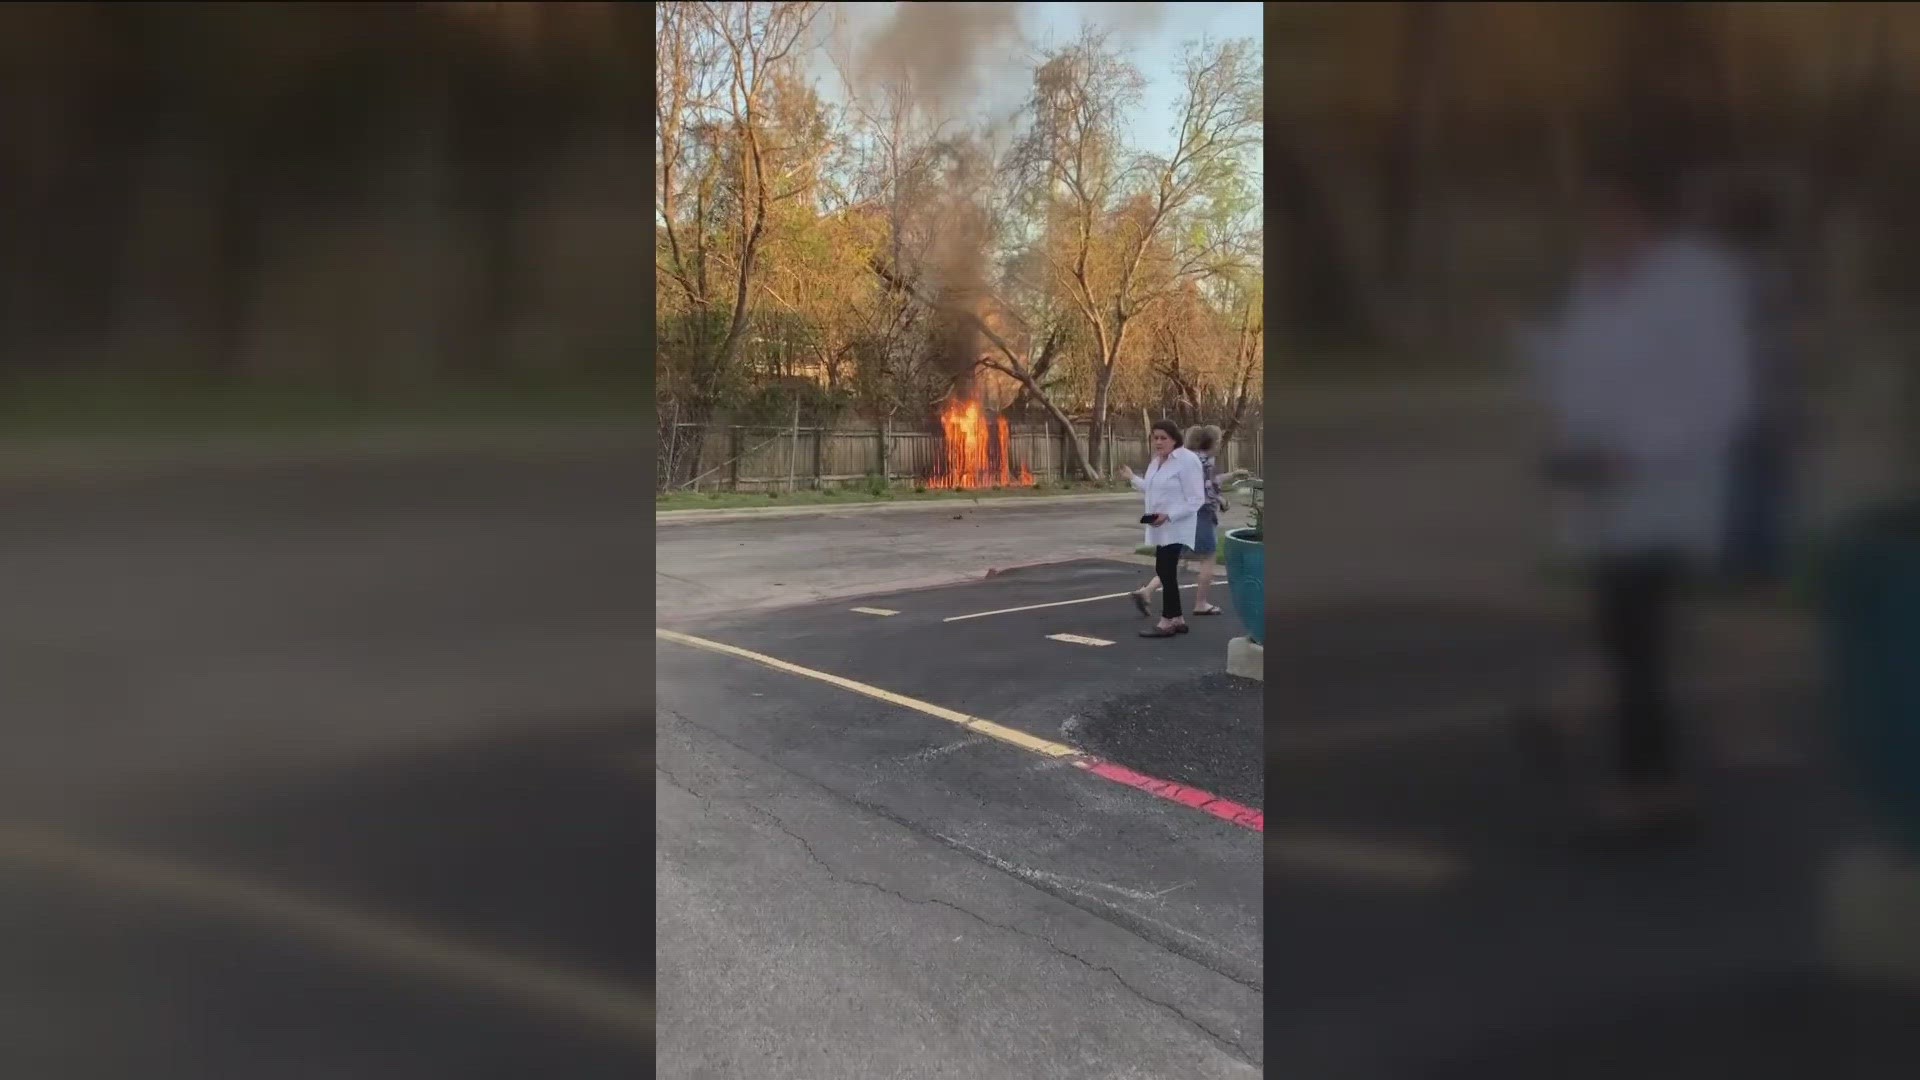 Neighbors in a North Austin community are pleading for help after multiple fires from an encampment just feet from their homes.